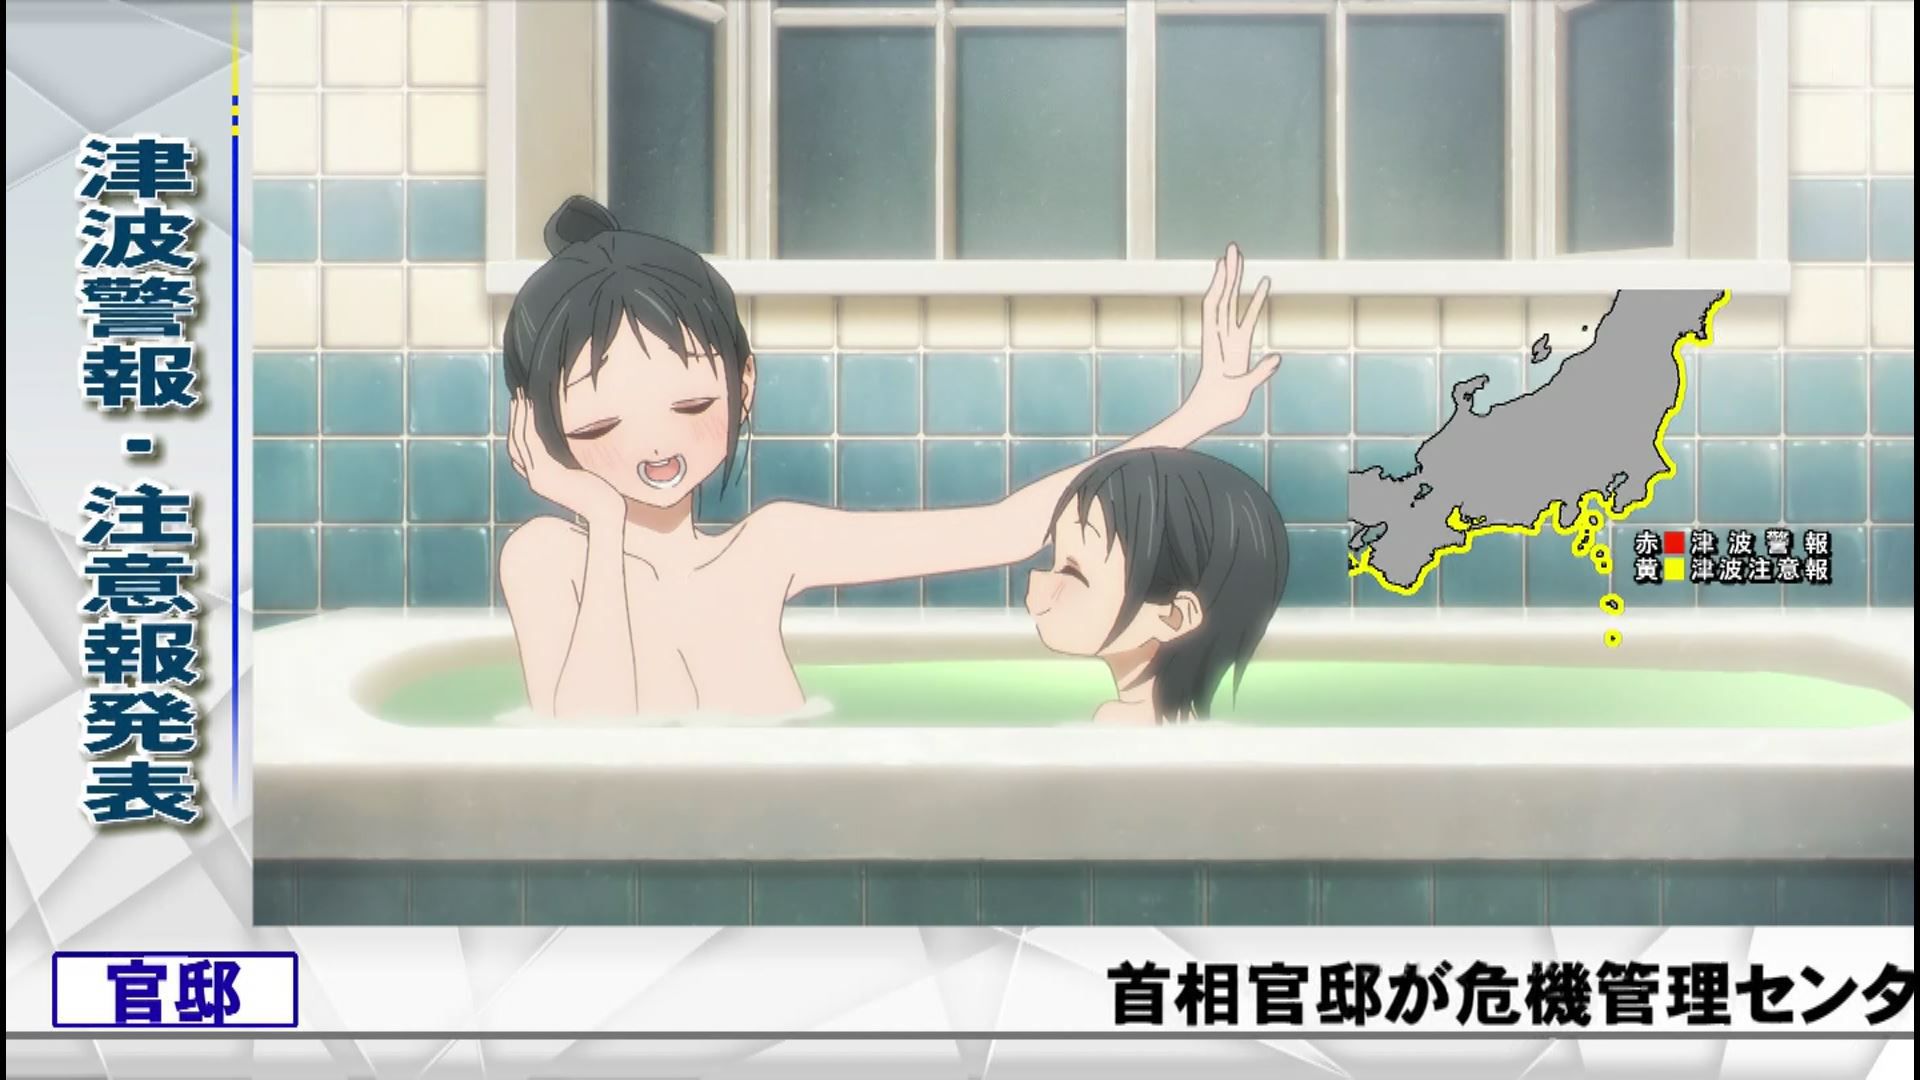 In the anime "Tomorrow-chan's Sailor Suit" episode 2, the girl's erotic bathing scene and the punchy scene 24